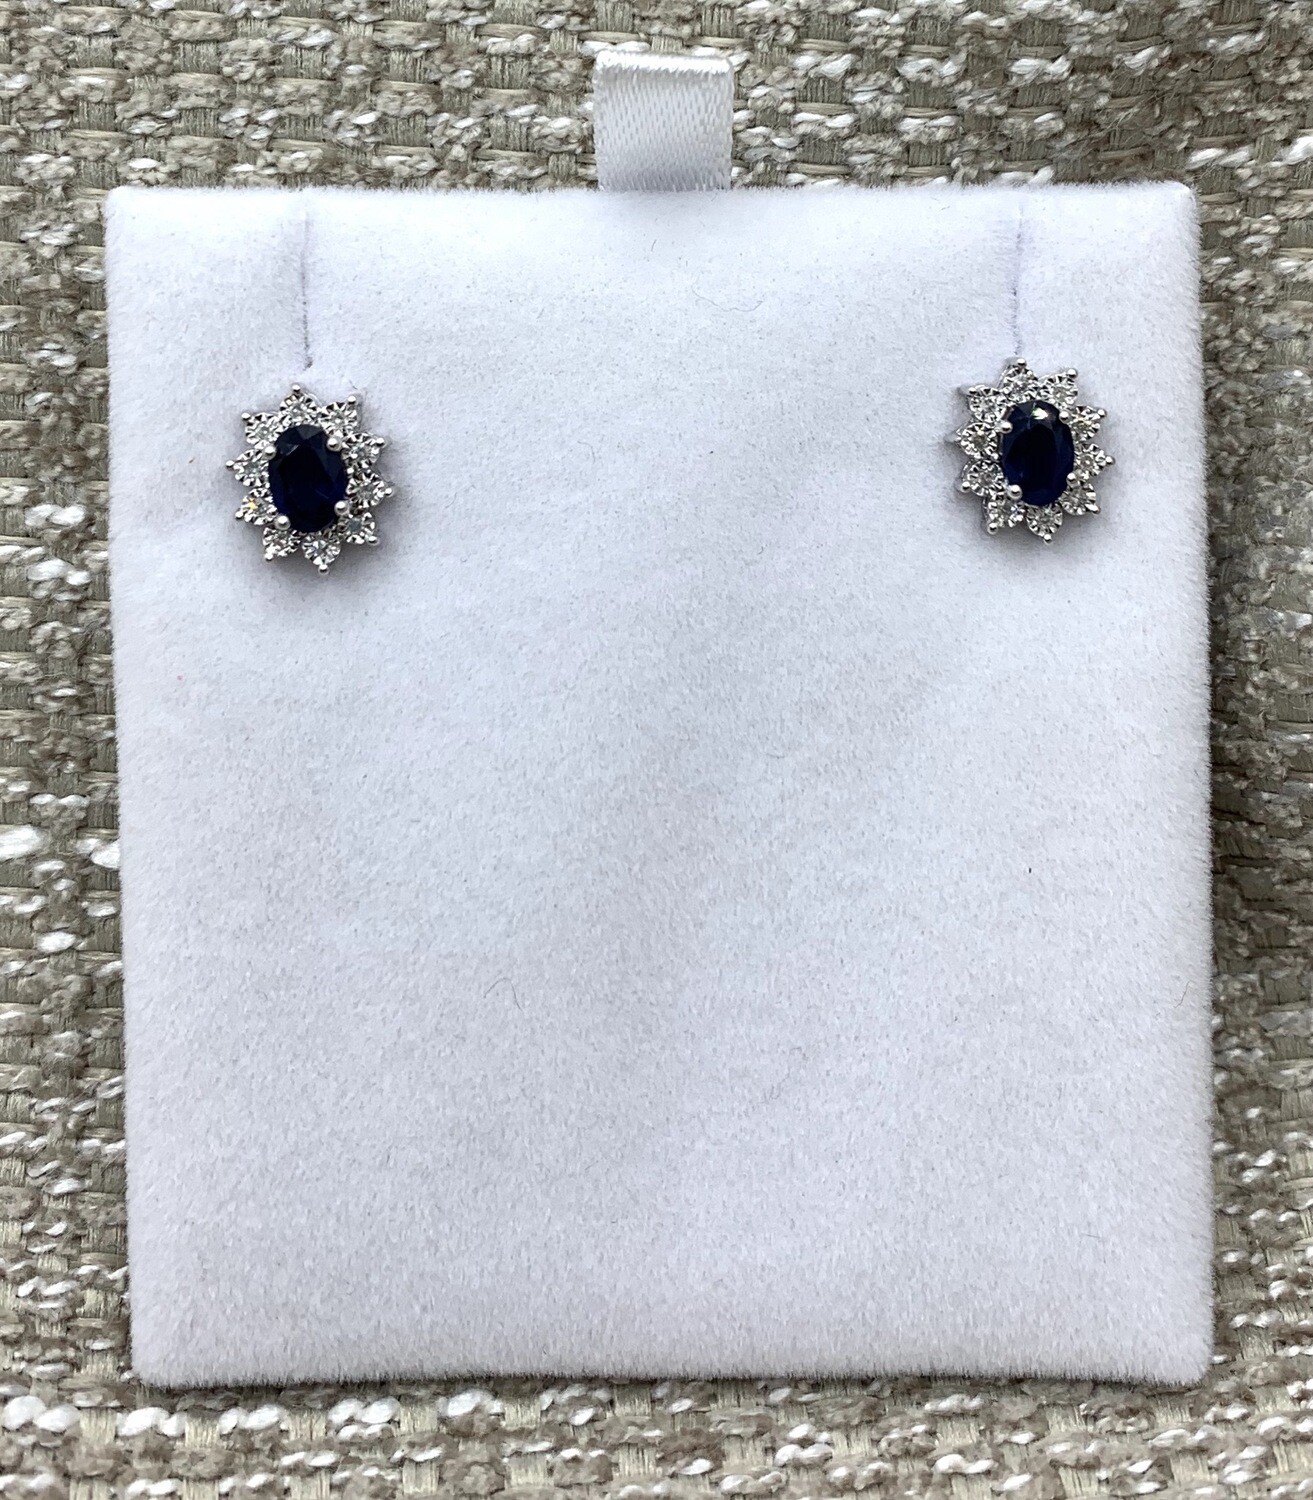 Genuine Sapphire And 8 pt Total Weight Diamond Earrings set in 10K White Gold